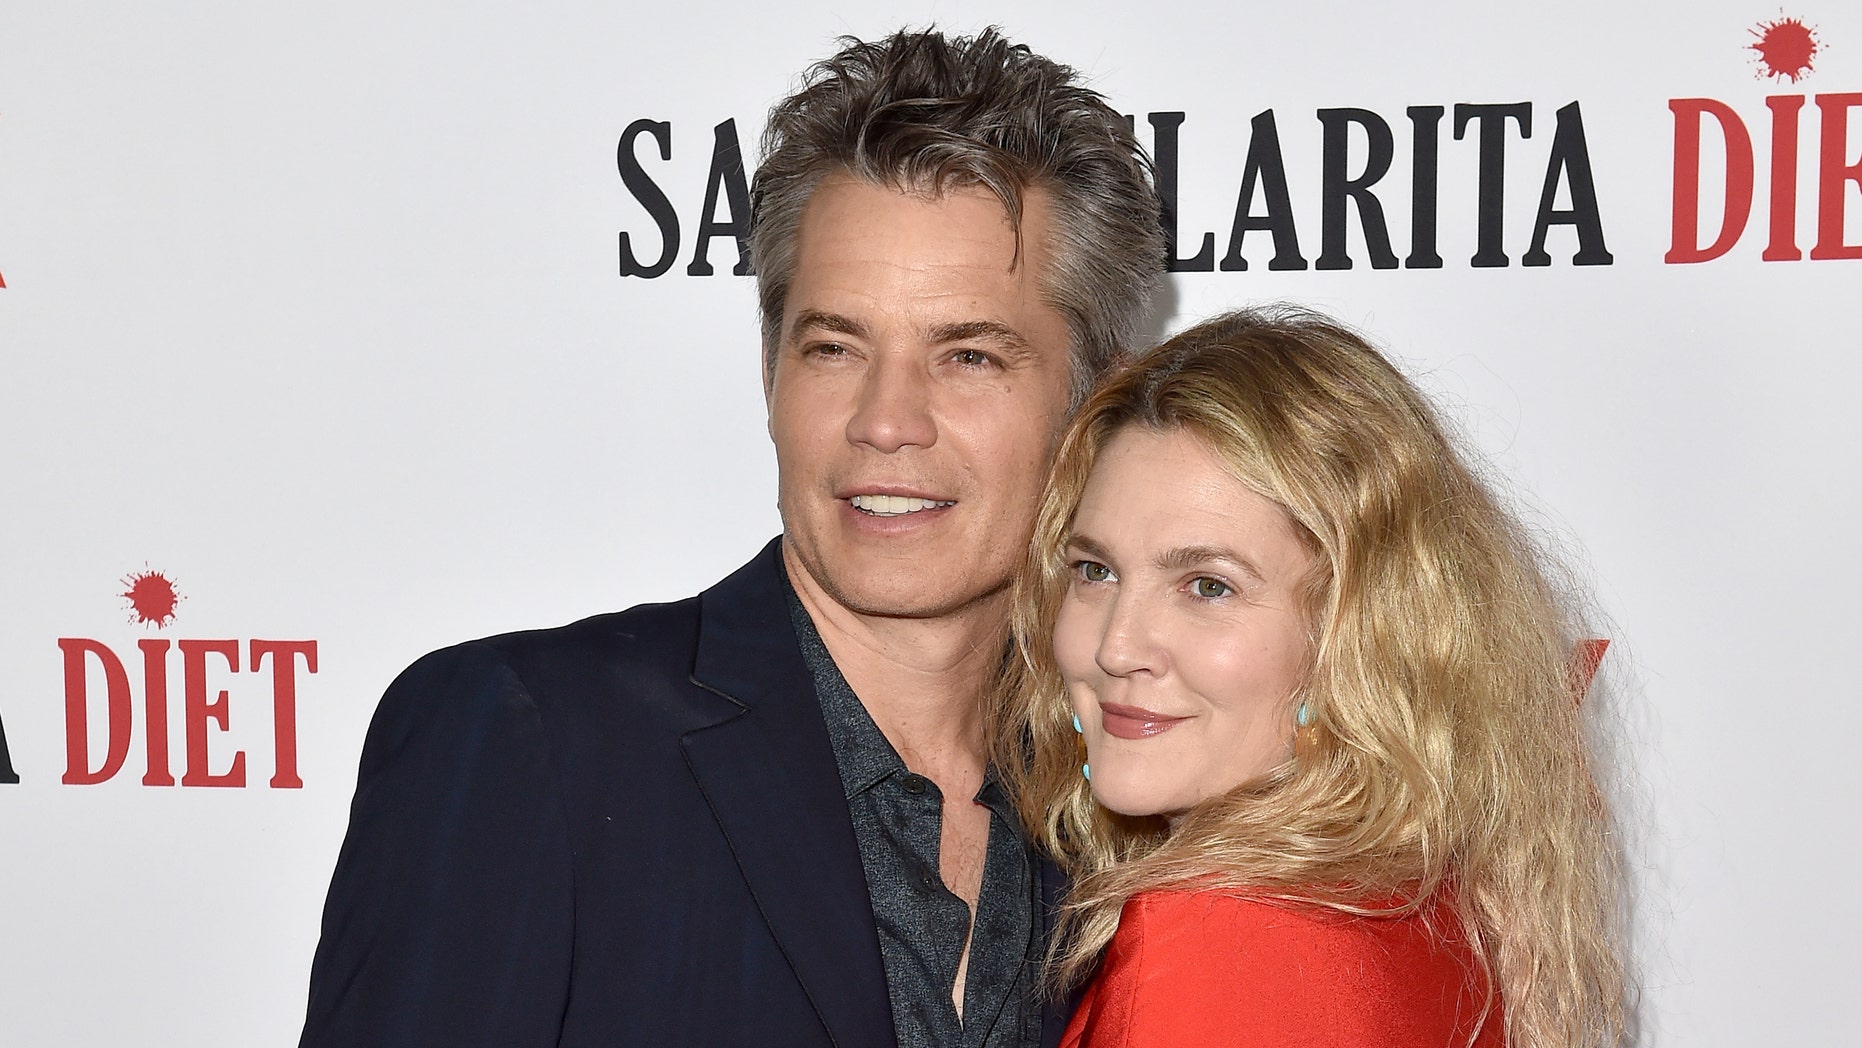 Actors Timothy Olyphant and Drew Barrymore attend the season 2 premiere of Netflix's "Santa Clarita Diet"